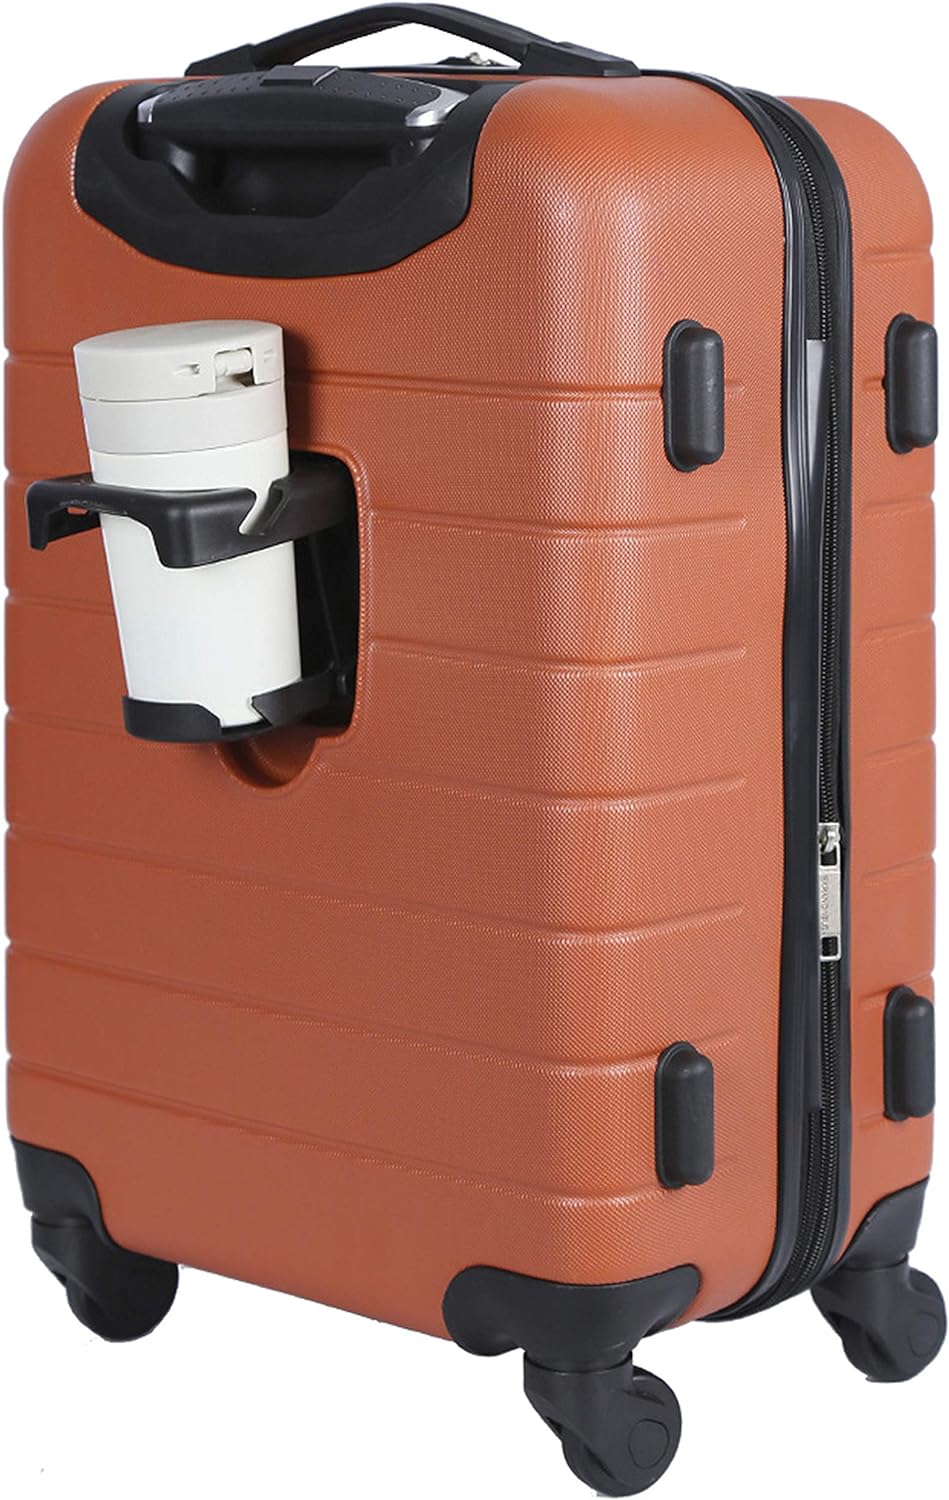 Wrangler Smart Luggage Set with Cup Holder and USB Port, Burnt Orange, 20-Inch Carry-On 